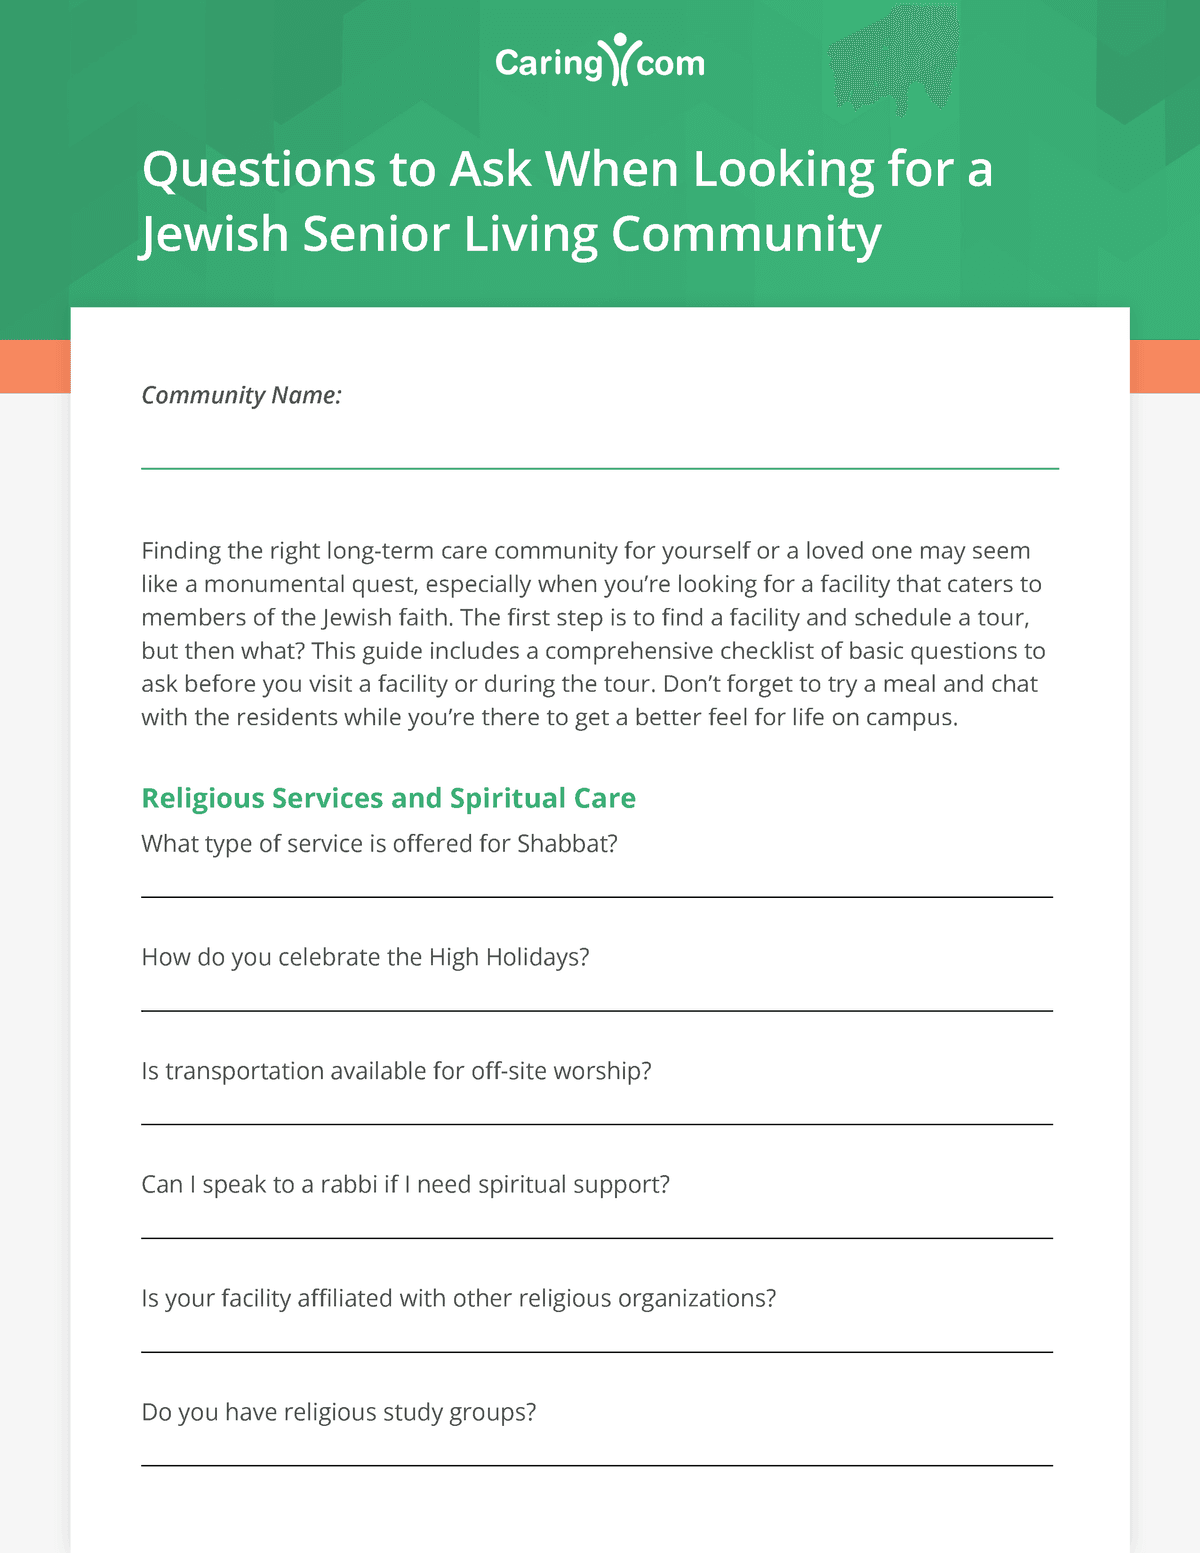 Questions to Ask When Looking for a Jewish Senior Living Community